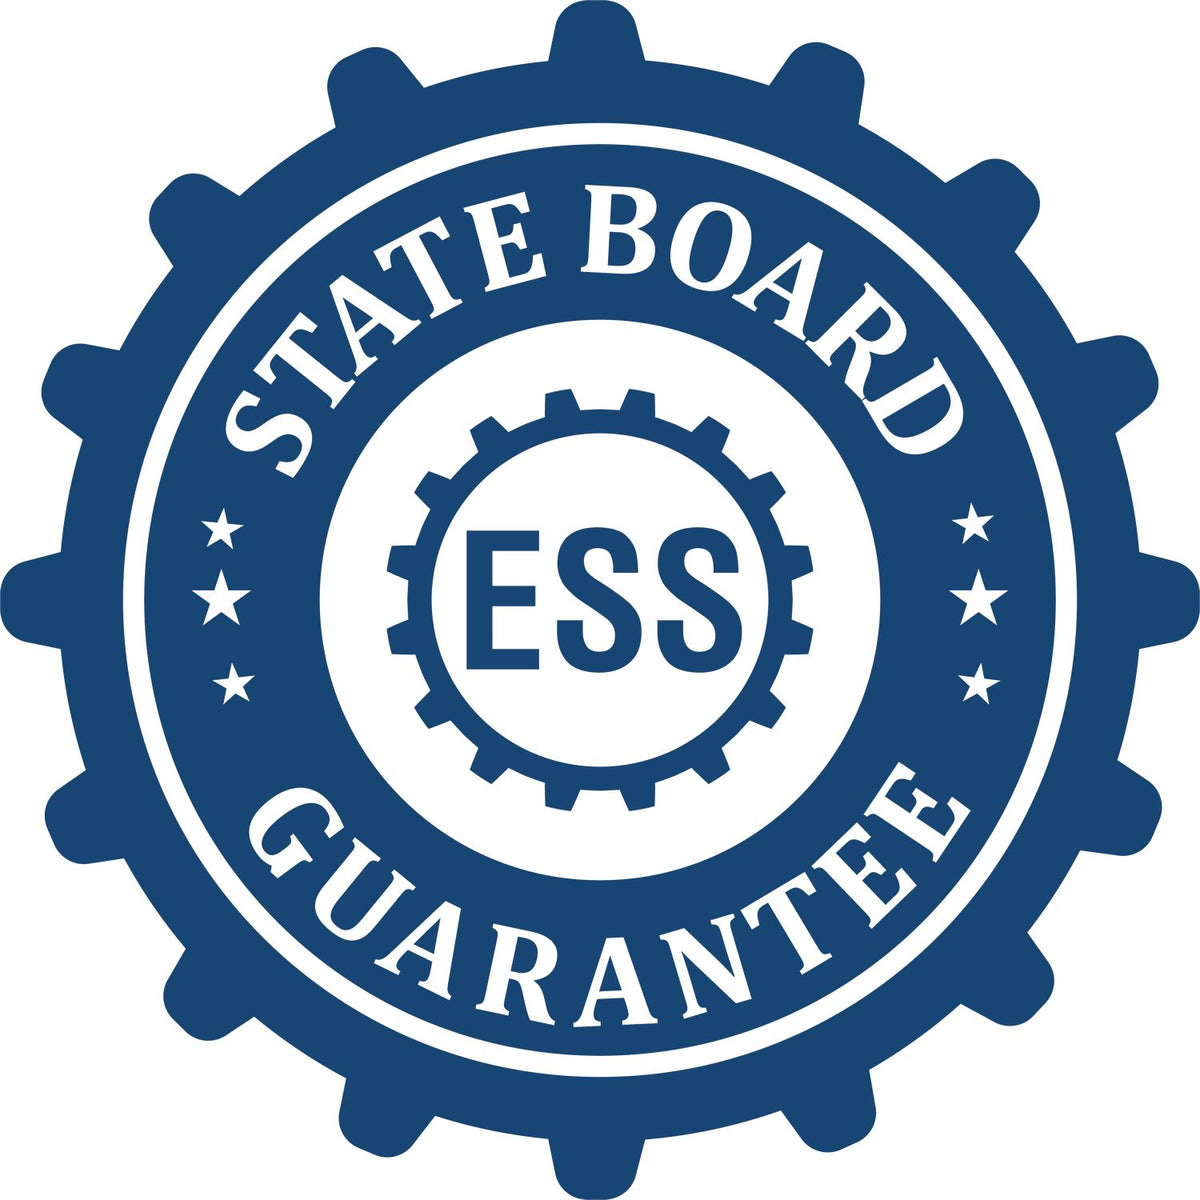 An emblem in a gear shape illustrating a state board guarantee for the State of Pennsylvania Extended Long Reach Geologist Seal